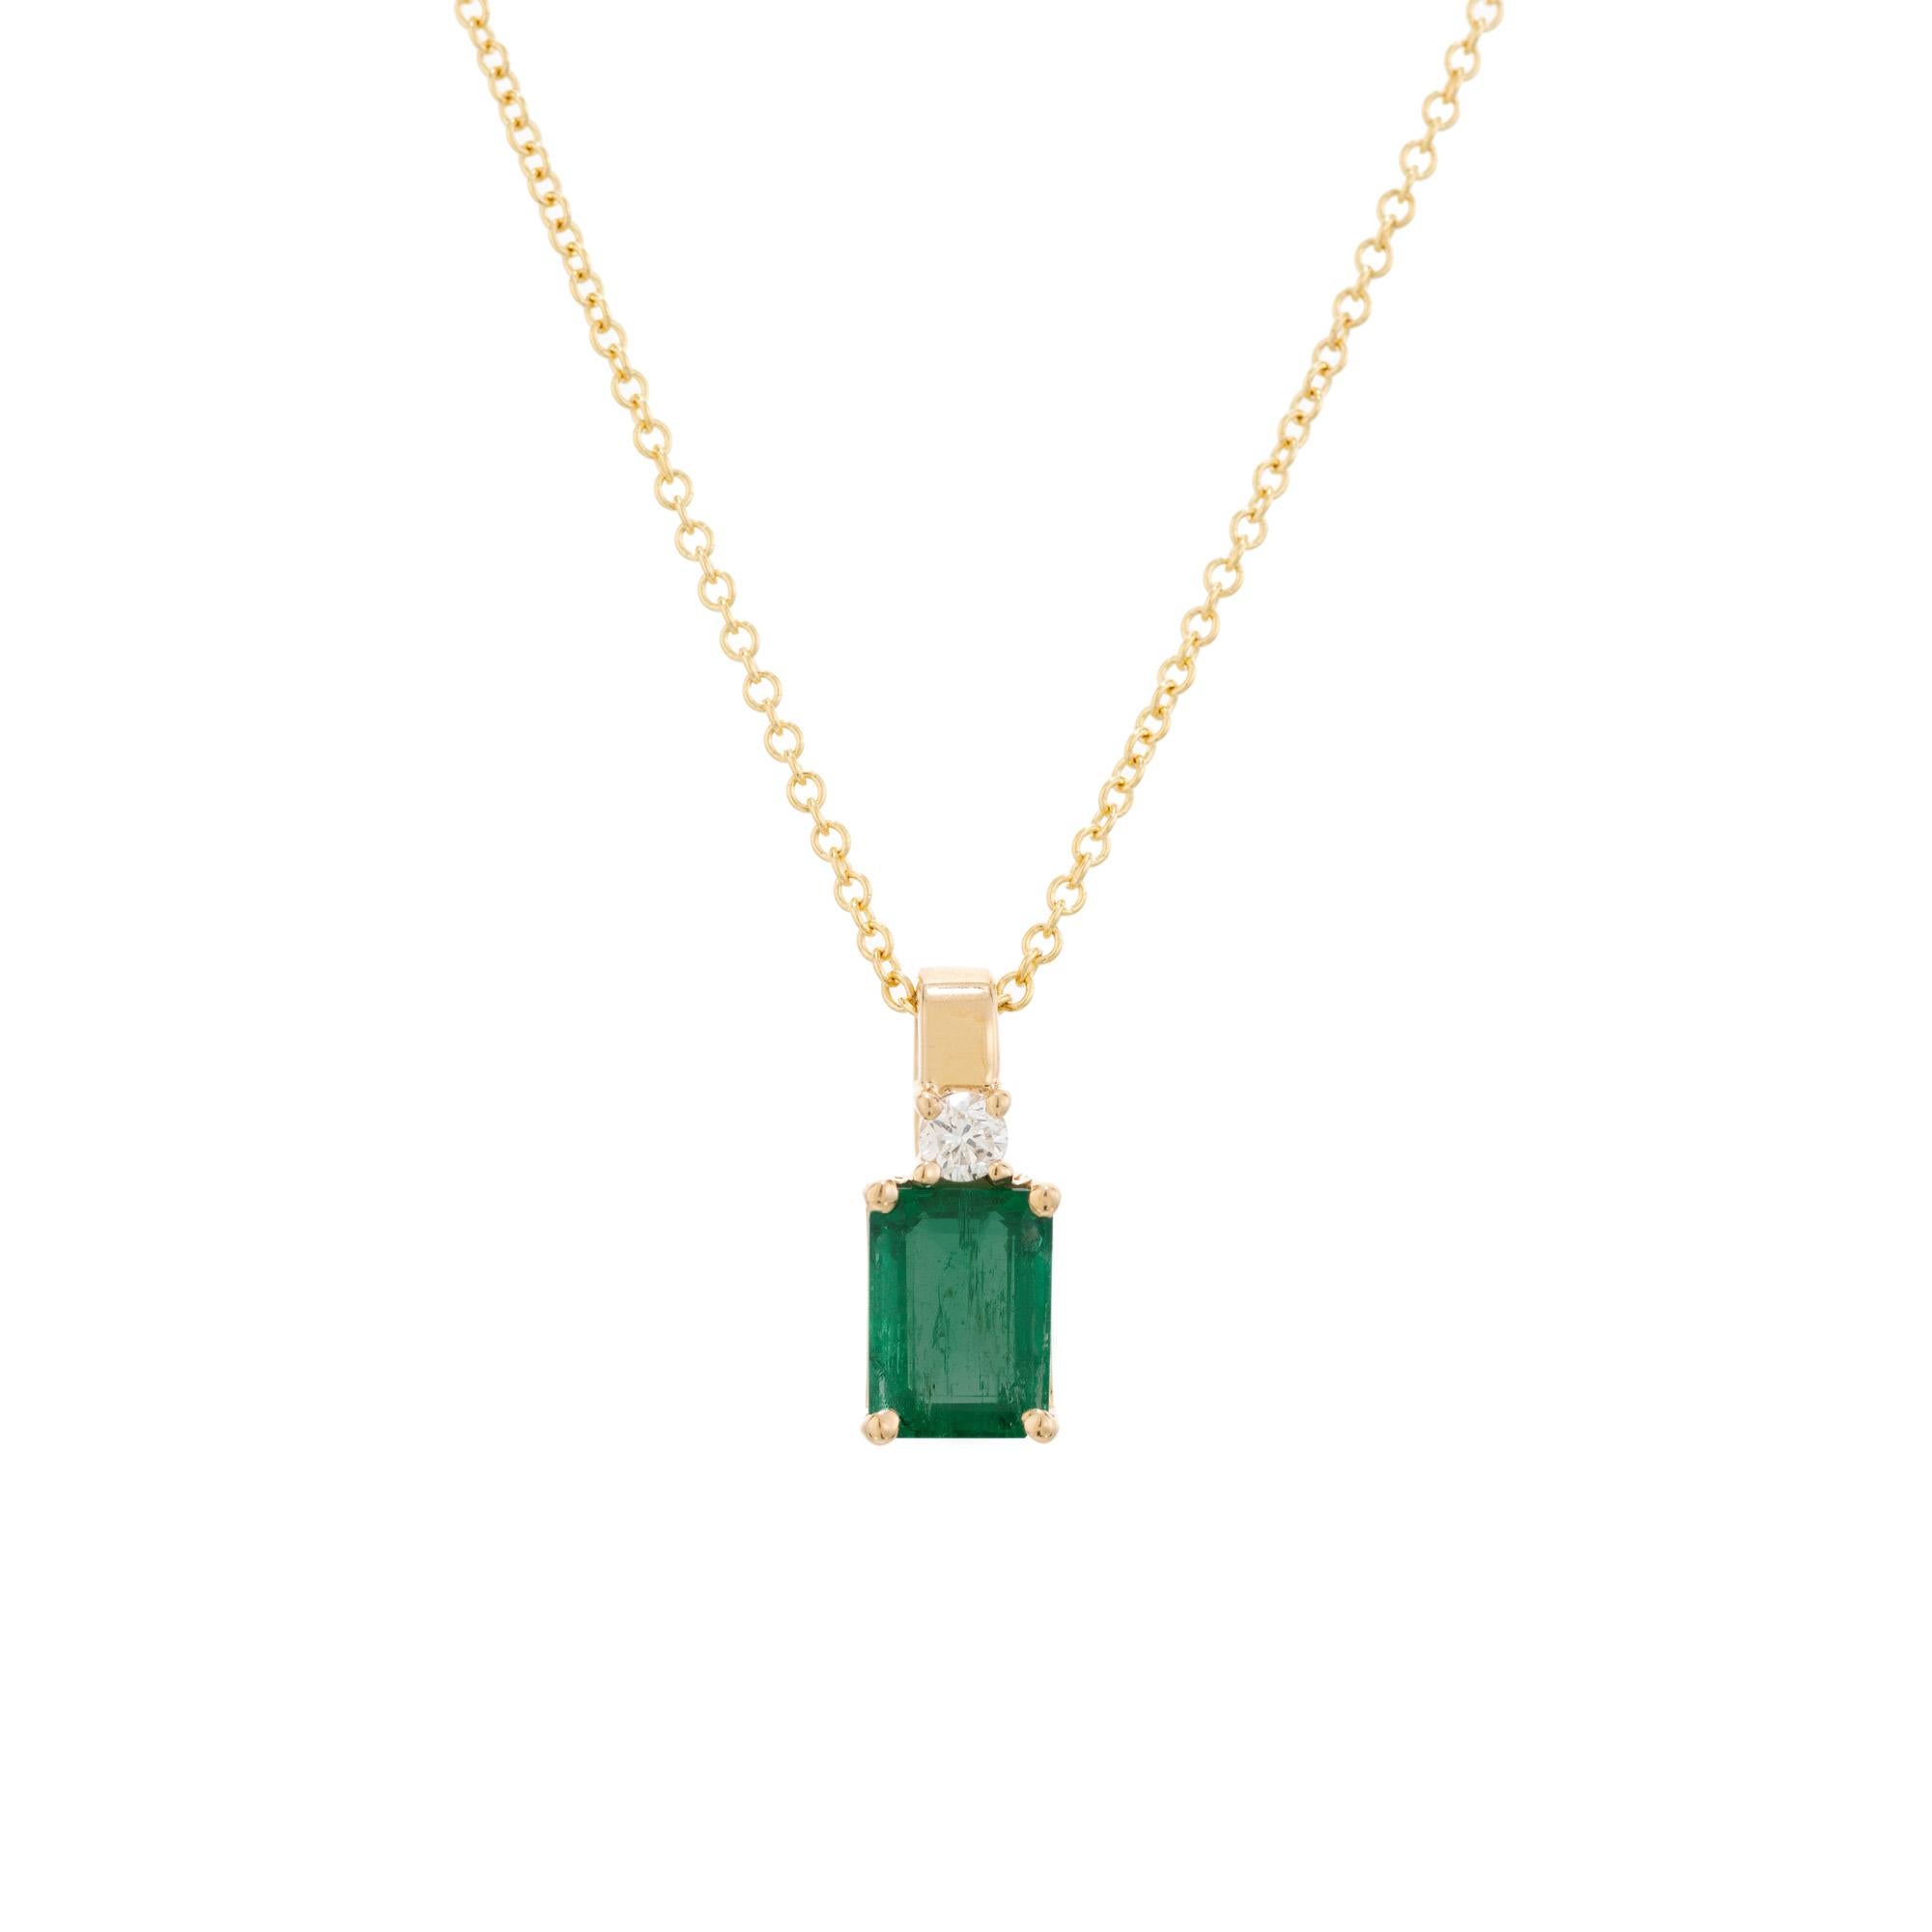 Crisp green emerald and diamond pendant necklace. GIA certified .81ct octagonal cut emerald set in a simple 4 prong 14k yellow gold setting accented with 1 round brilliant cut diamond .6cts.  An 18 inch 14k yellow gold chain completes this piece.